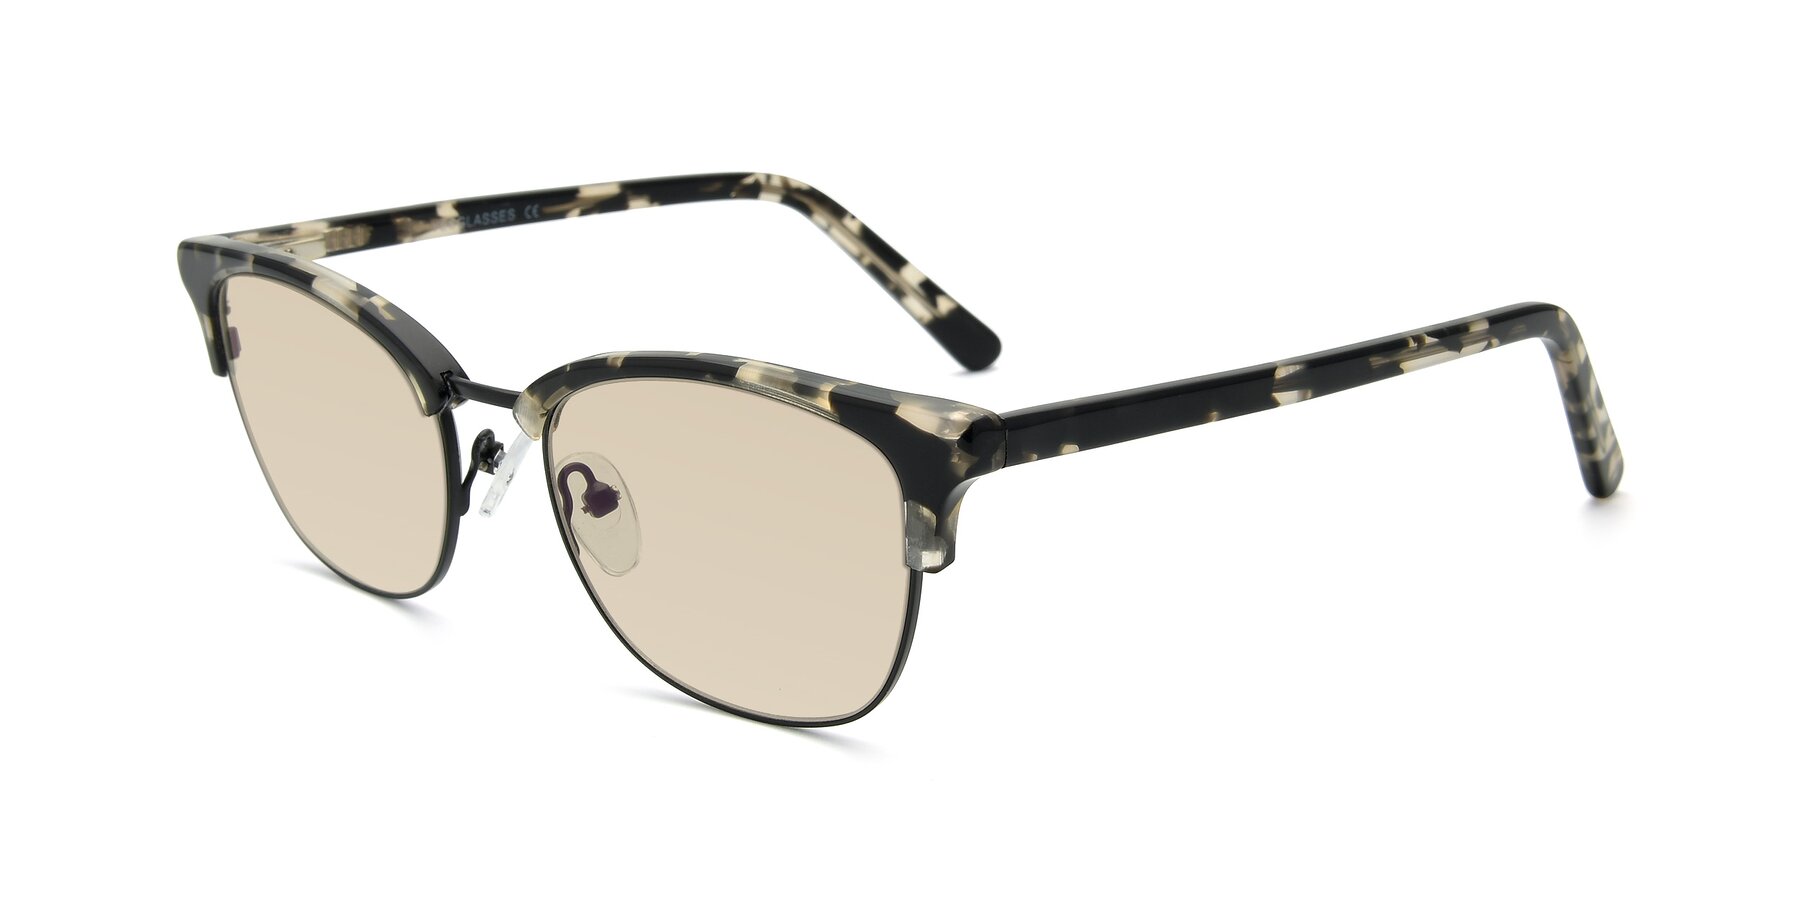 Angle of 17463 in Black-Tortoise with Light Brown Tinted Lenses